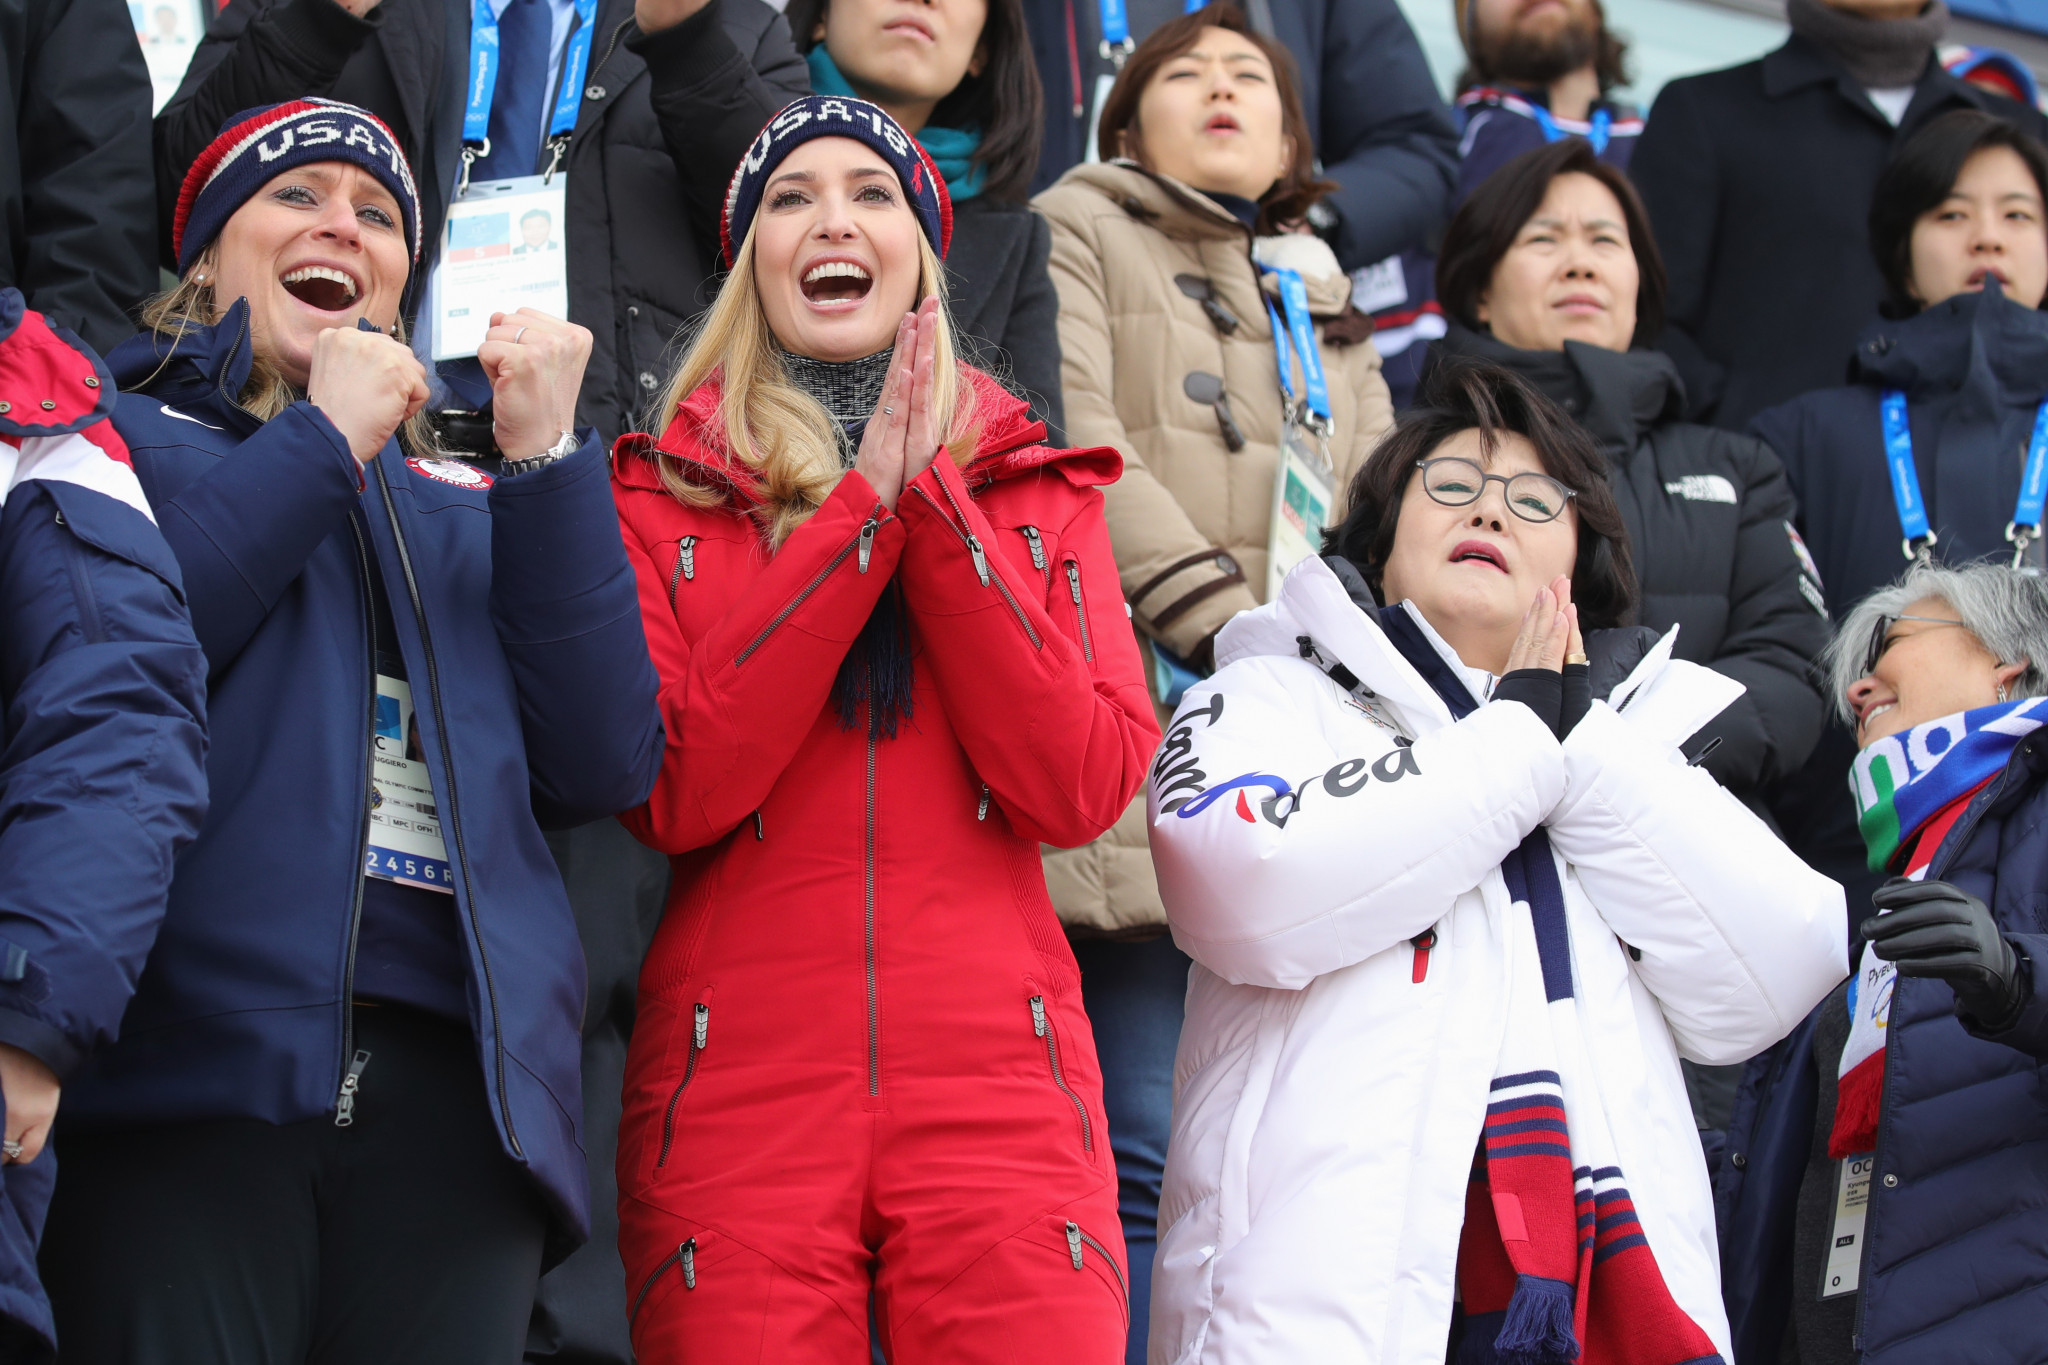 Angela Ruggiero, left, pictured alongside Ivanka Trump at last month's Winter Olympics in Pyeongchang ©Getty Images